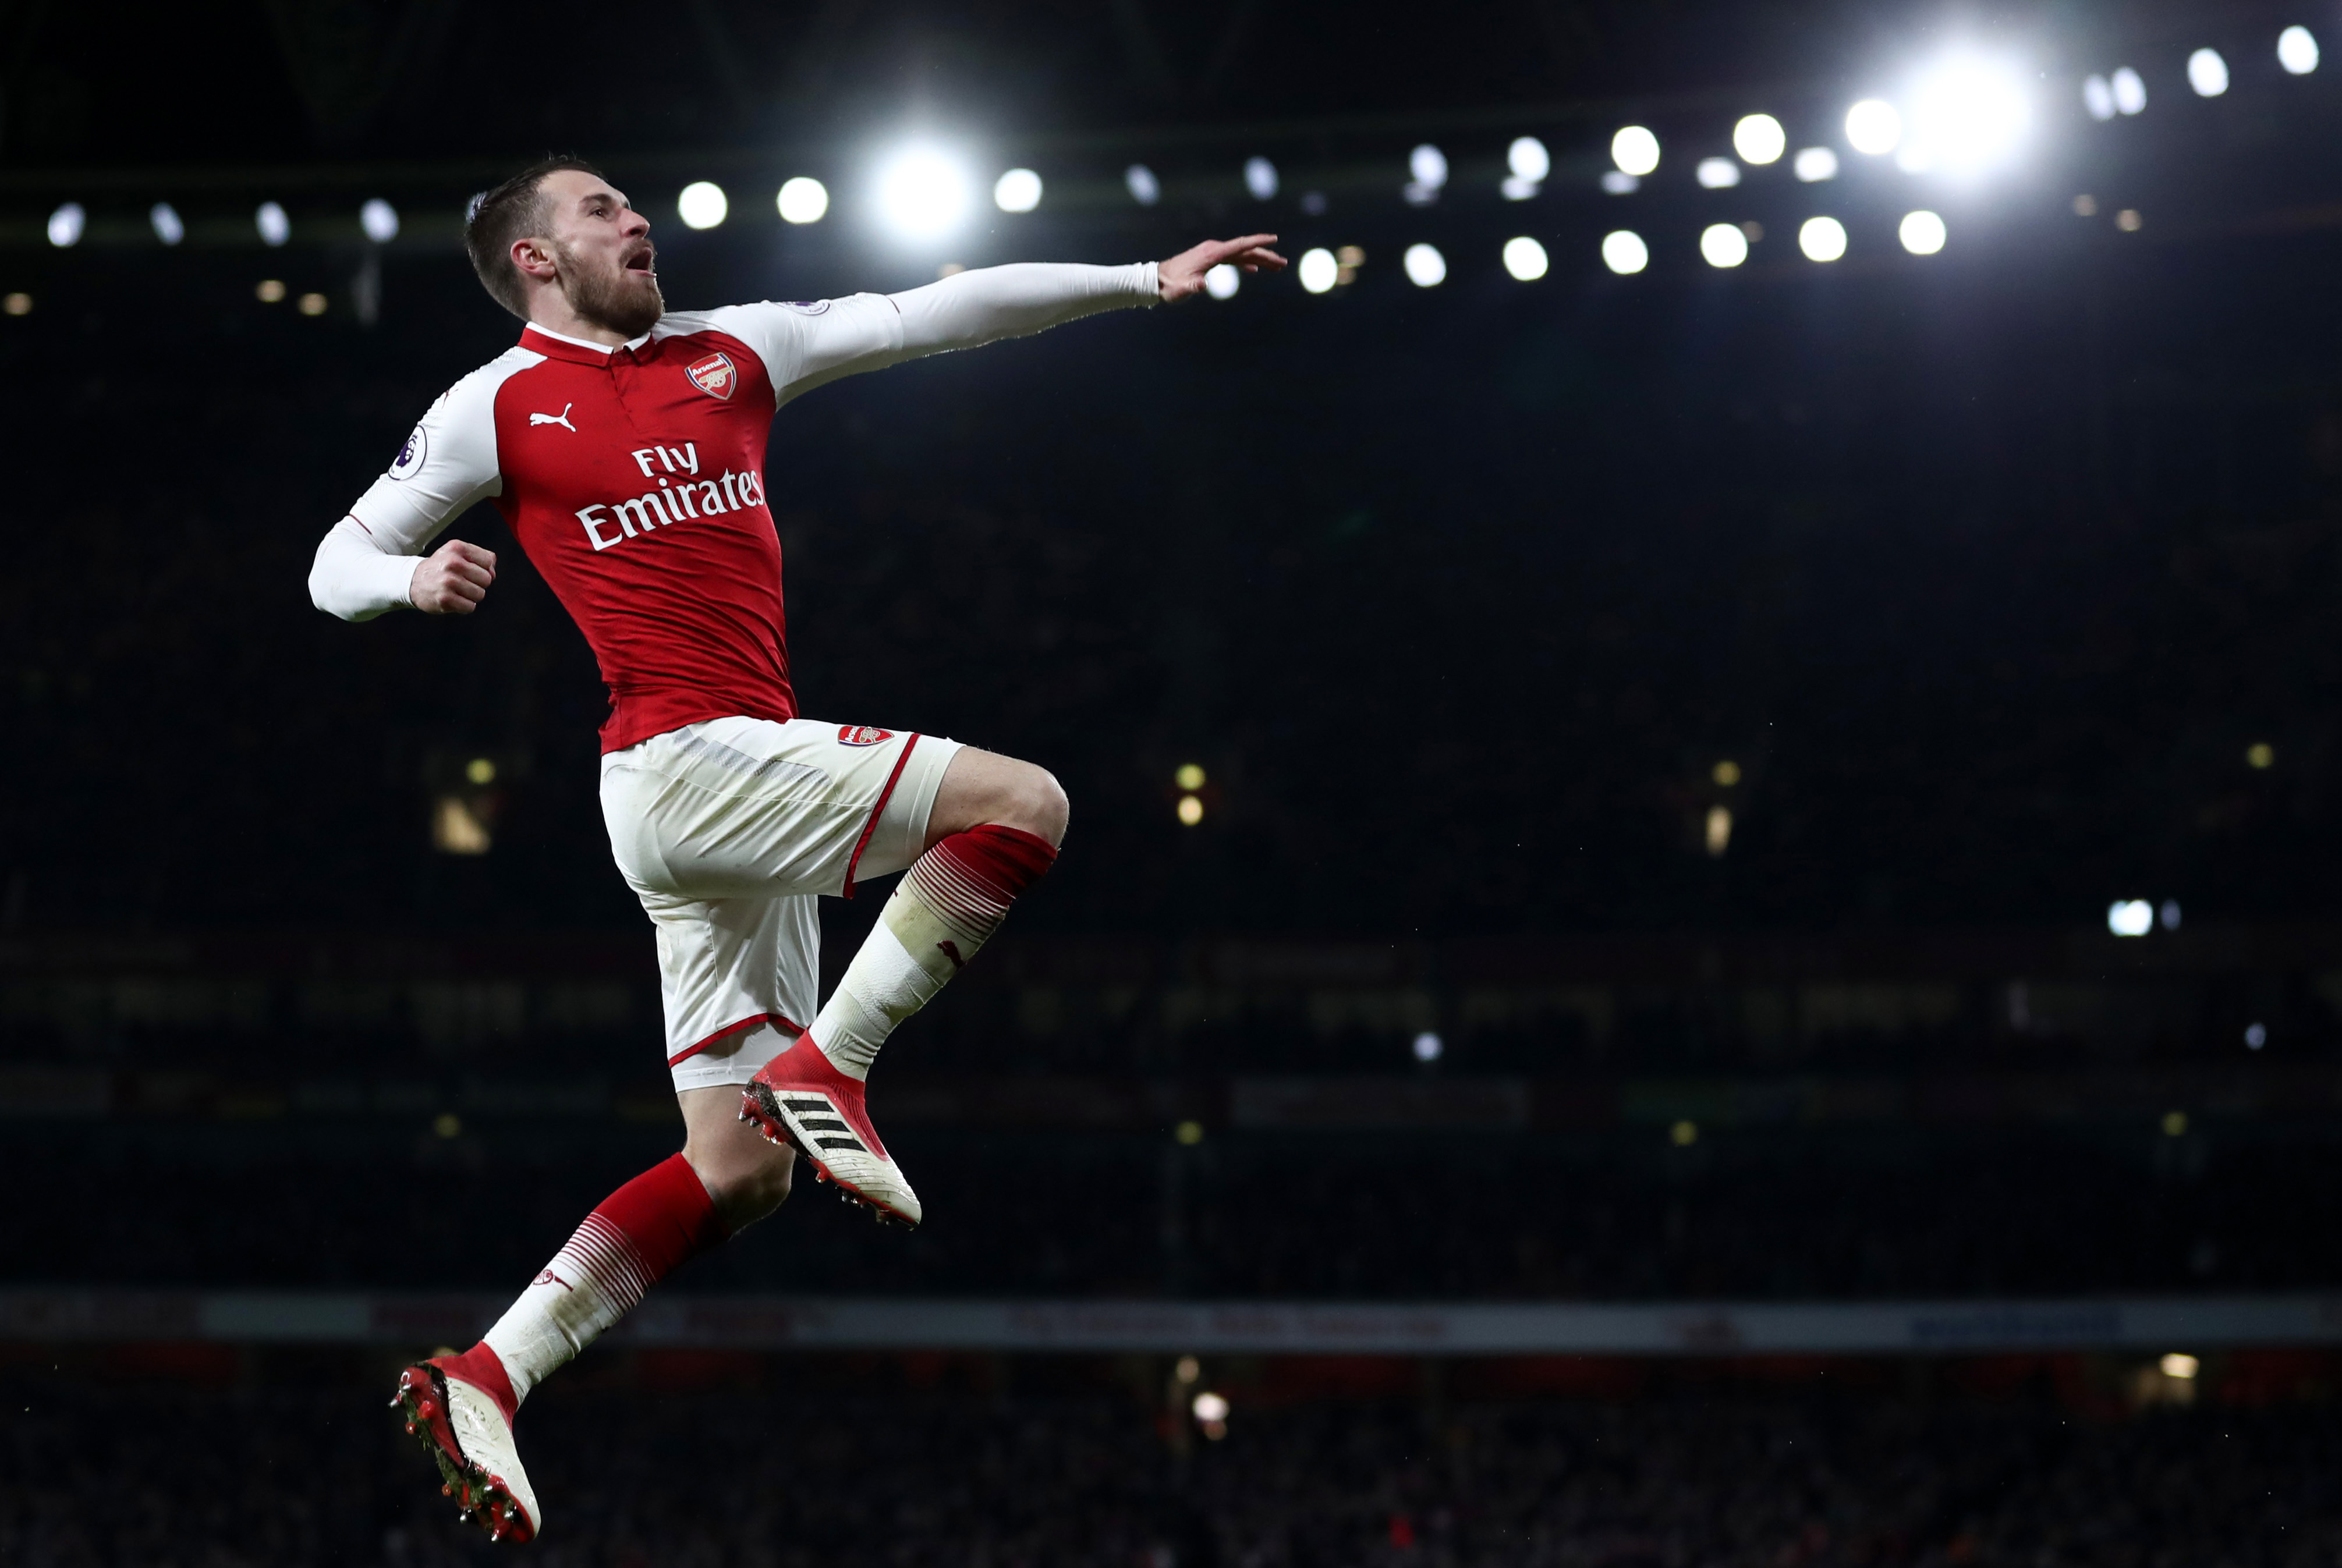 LONDON, ENGLAND - FEBRUARY 03:  Aaron Ramsey of Arsenal celebrates after scoring his sides fifth goal and his hat-trick during the Premier League match between Arsenal and Everton at Emirates Stadium on February 3, 2018 in London, England. (Photo by Catherine Ivill/Getty Images)